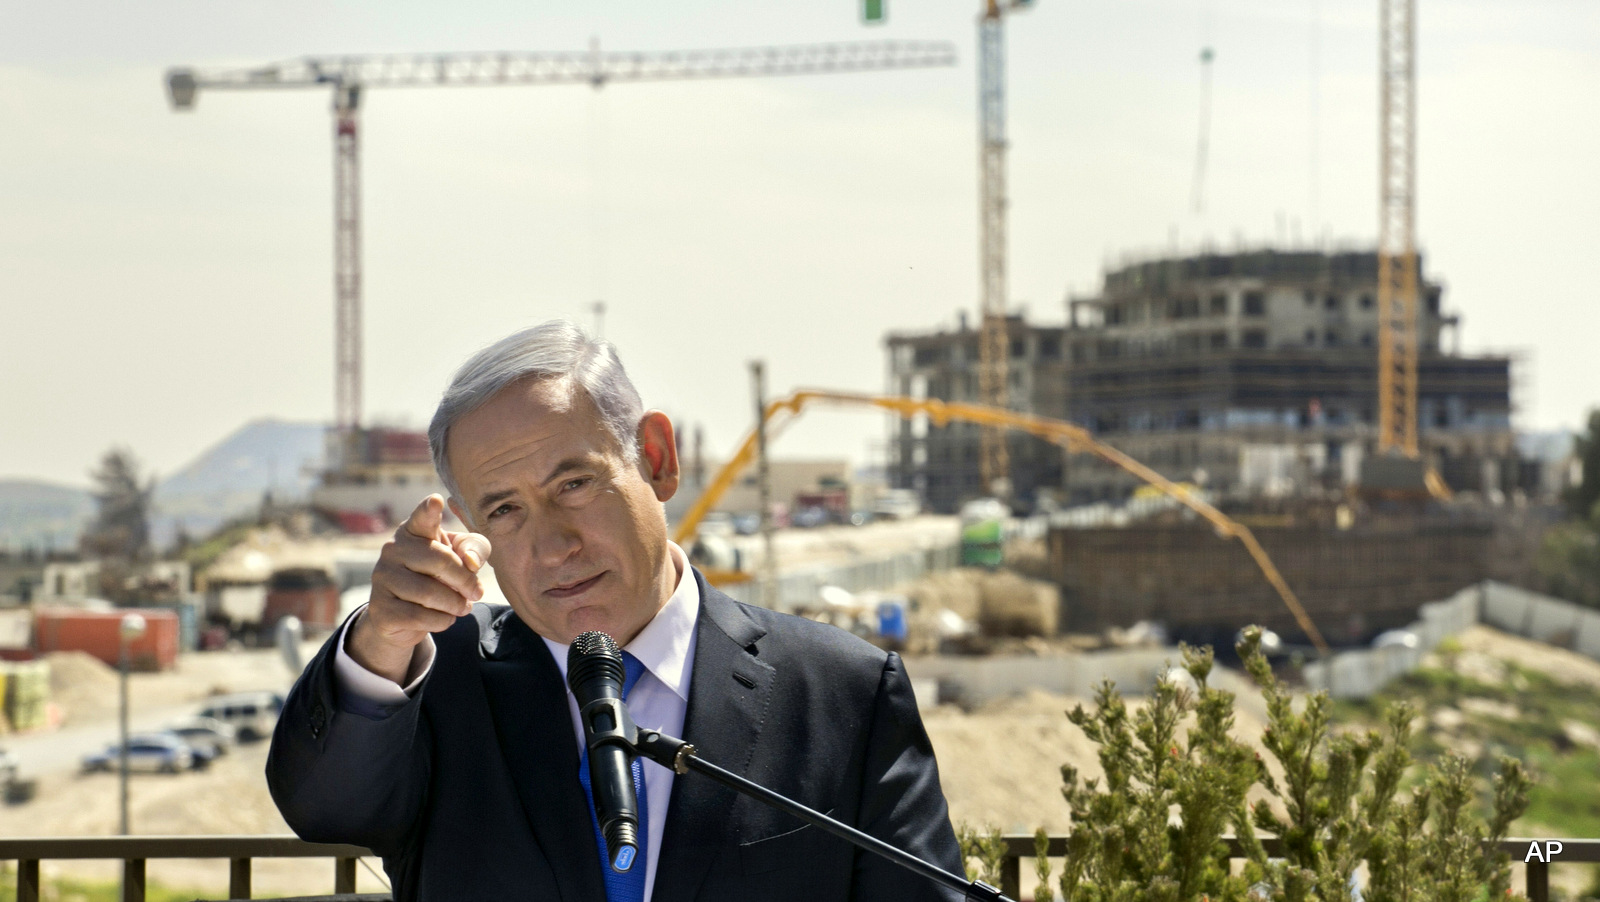 Israeli Prime Minister Benjamin Netanyahu talks as he visits a construction site in  Har Homa, east Jerusalem, Monday March 16, 2015, a day ahead of legislative elections. Netanyahu is seeking his fourth term as prime minister. 